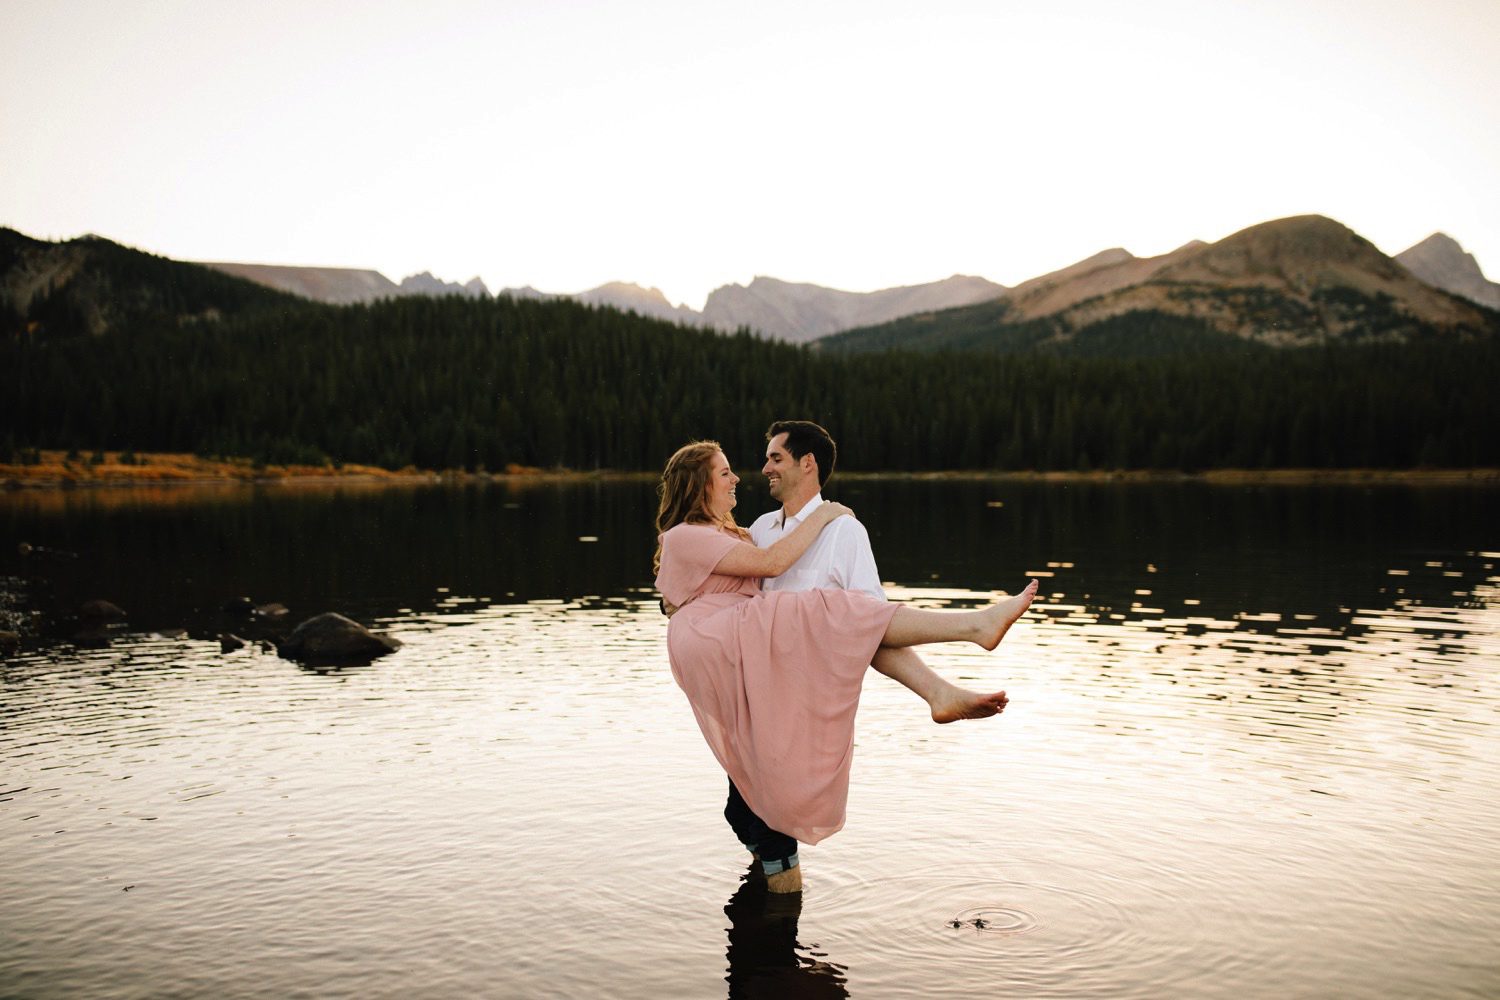 Roosevelt National Forest Engagement Photos, Brainard Lake Engagement Photos, Colorado Engagement Photographer, Colorado Mountain engagement photos, Colorado wedding photographer, Best photographers in Colorado, Best Colorado engagement photographers, Best Colorado Wedding photographers, Fun Engagement photo ideas, Engagement photos in water, Mountain Engagement session, Save the date photo ideas, Boulder Colorado Engagement photos, Rocky Mountain National Park Engagement Photos